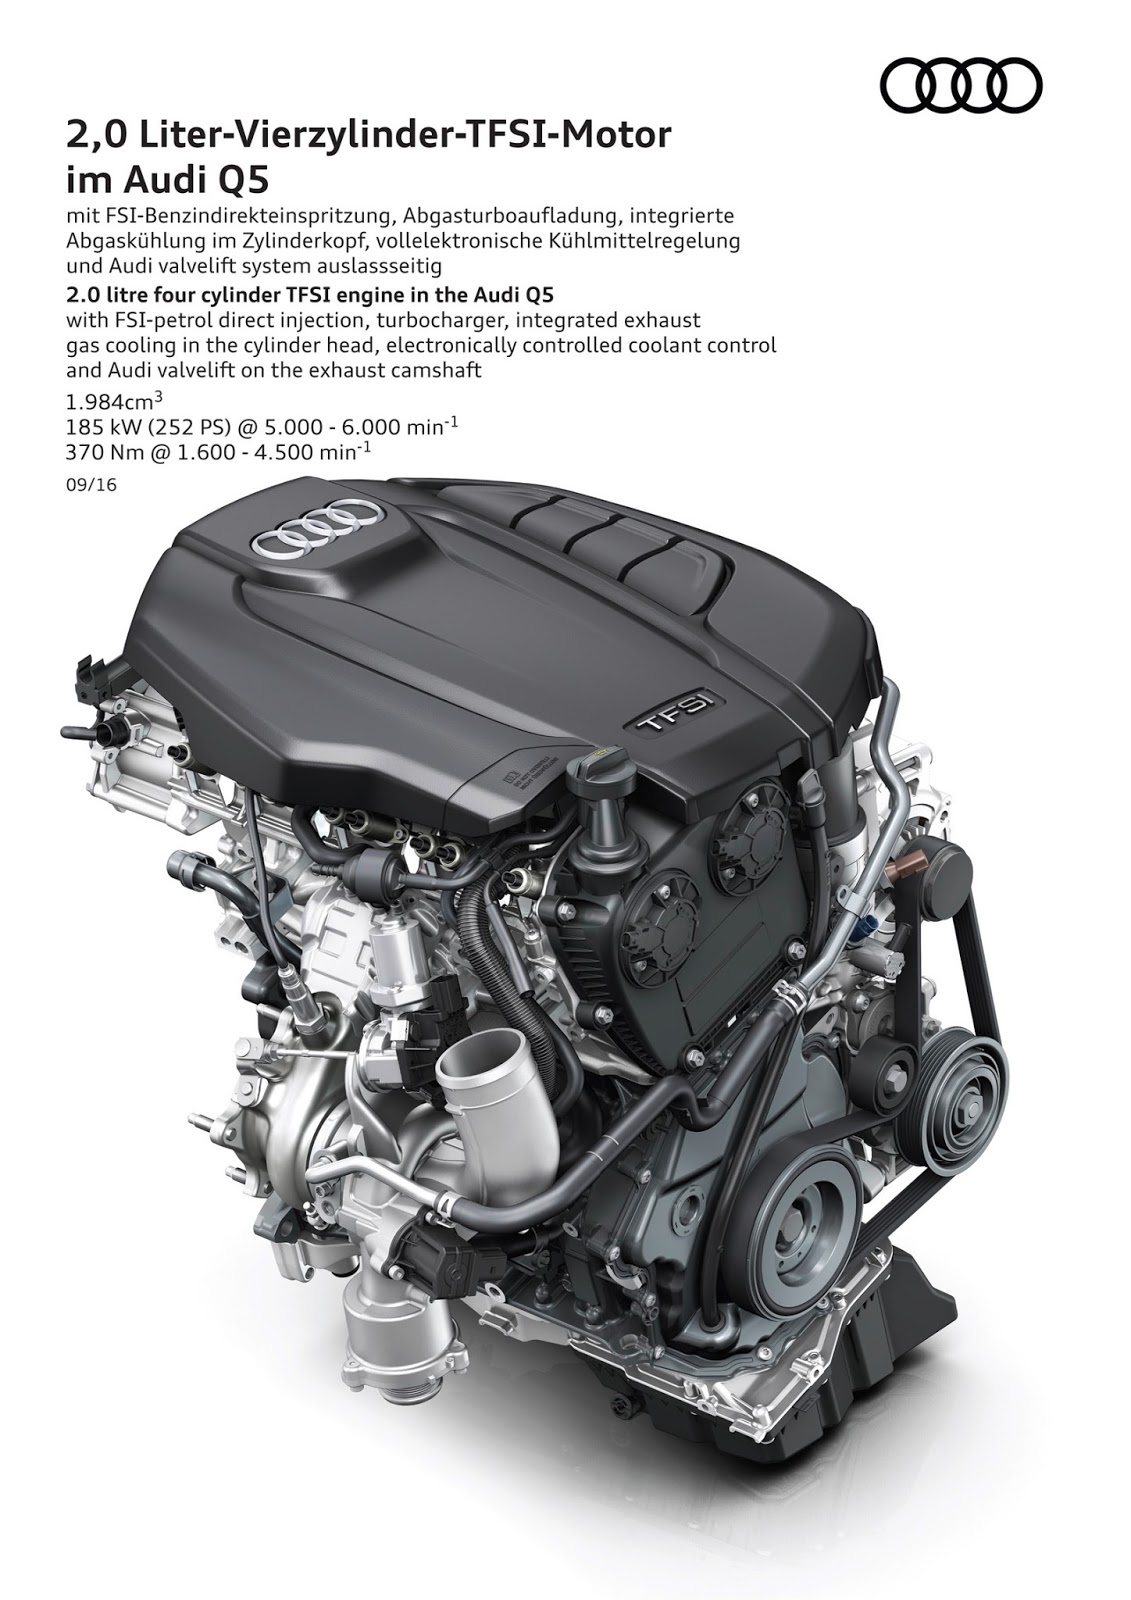 2.0 litre four cylinder TFSI engine in the Audi Q5